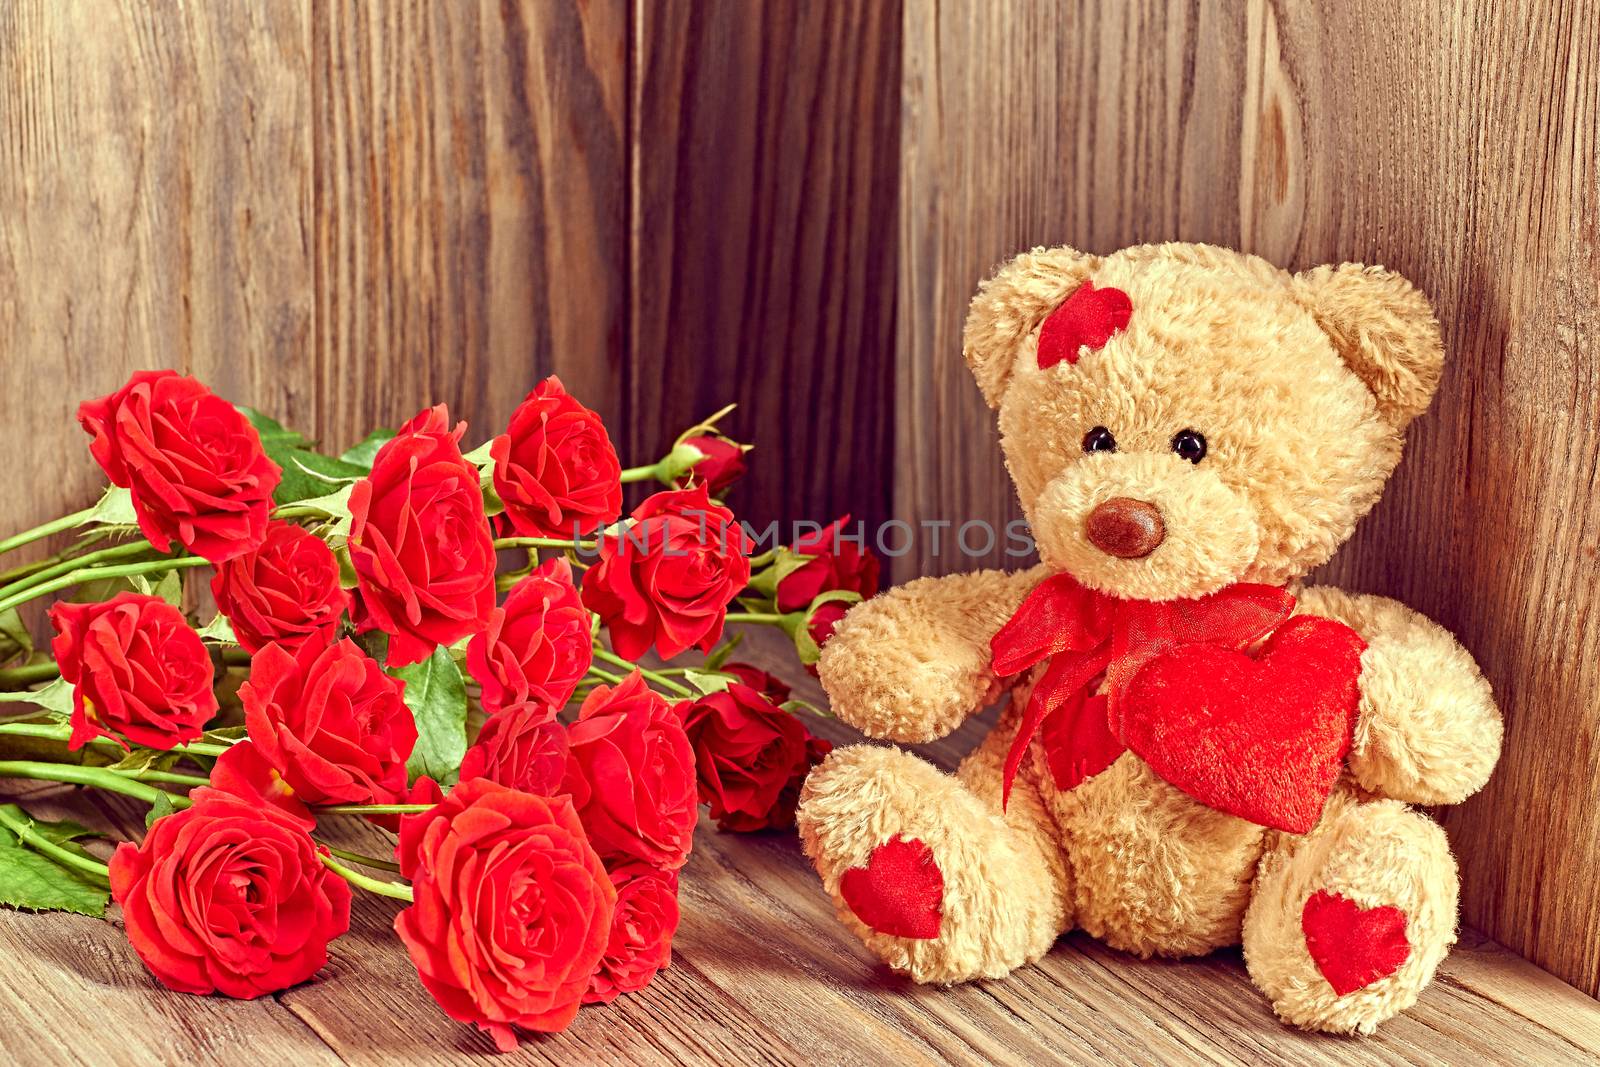 Valentines Day. Teddy Bear Loving cute with red hearts sitting alone with bouquet of red roses. Vintage. Retro romantic styled on wooden background. Copyspase